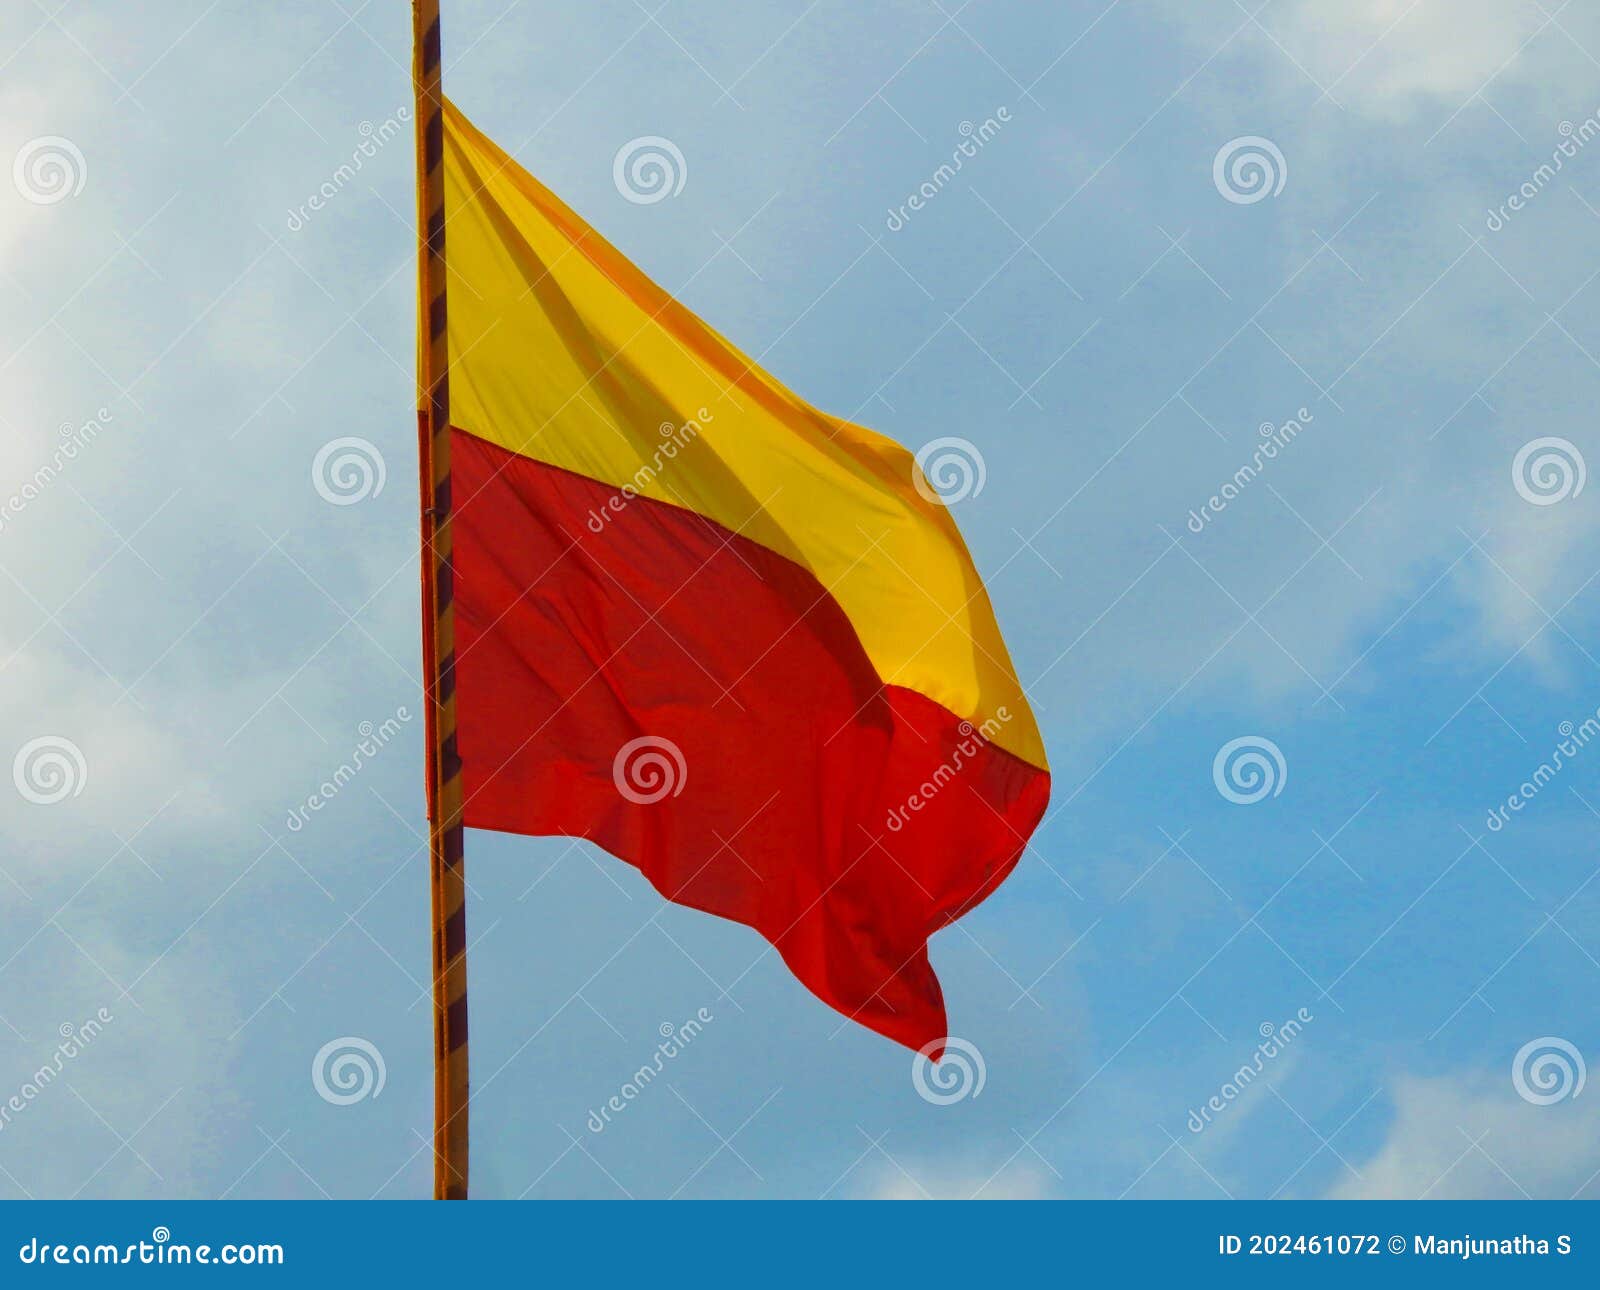 Beautiful Karnataka Yellow and Red Color Flag Waving or Flying in a Sky  Background Stock Photo - Image of geography, fabric: 202461072